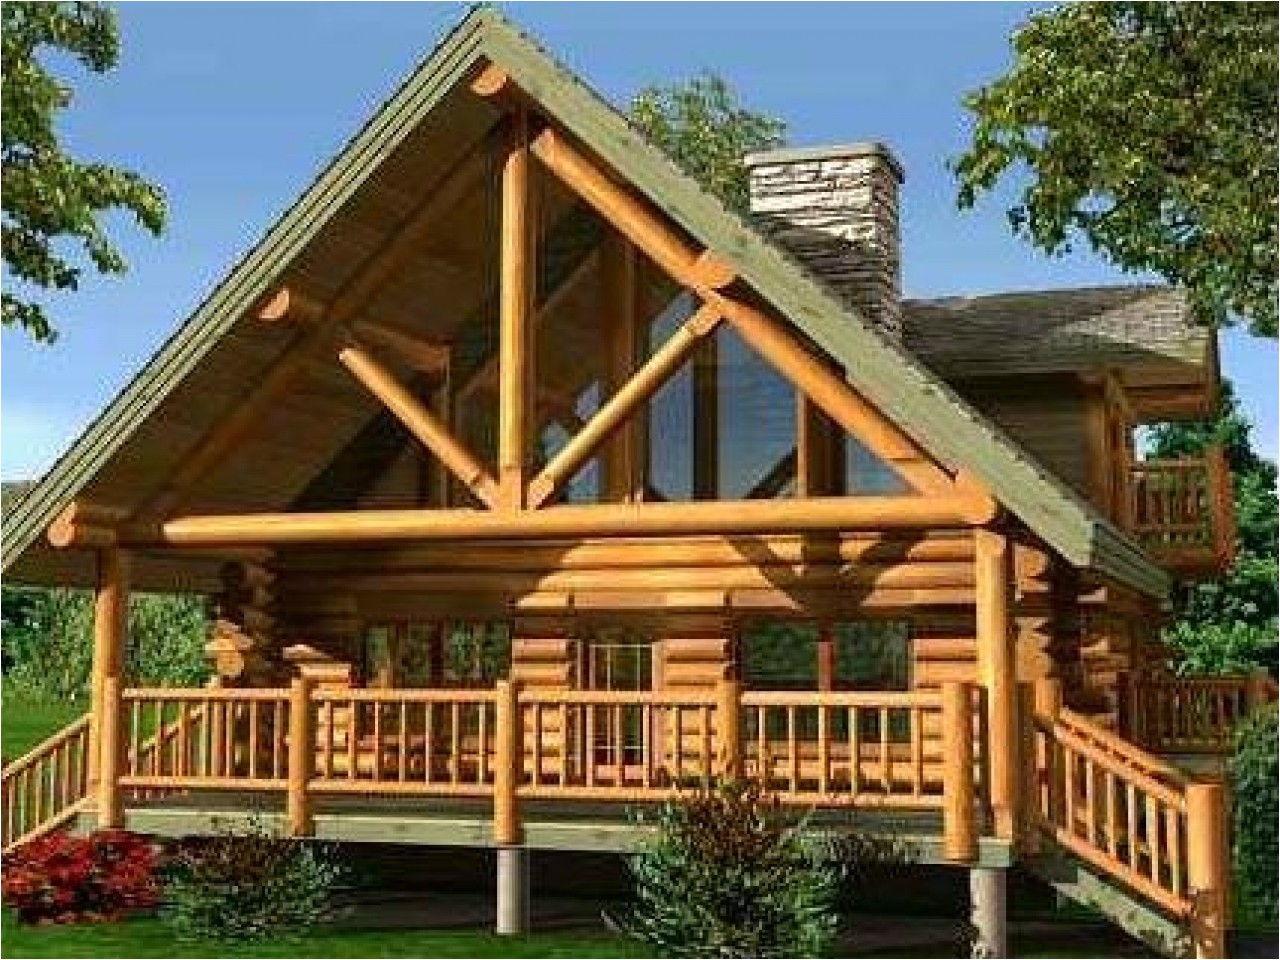 2c8d9d9cbff8fe83 small log home with loft small log cabin home designs